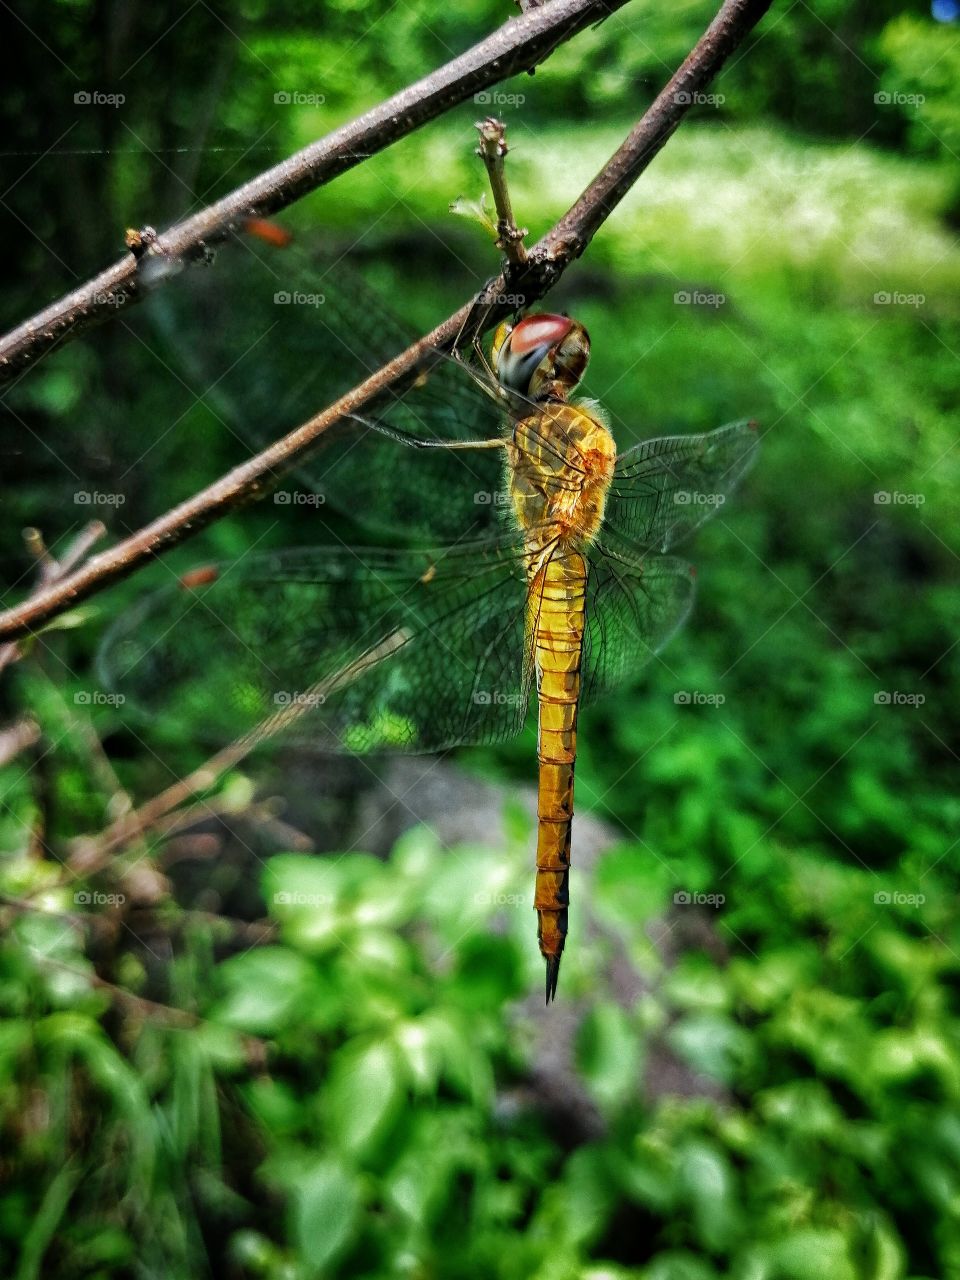 A dragonfly in the wild.
One of the most innocent creature but one of the mose feared. JK.